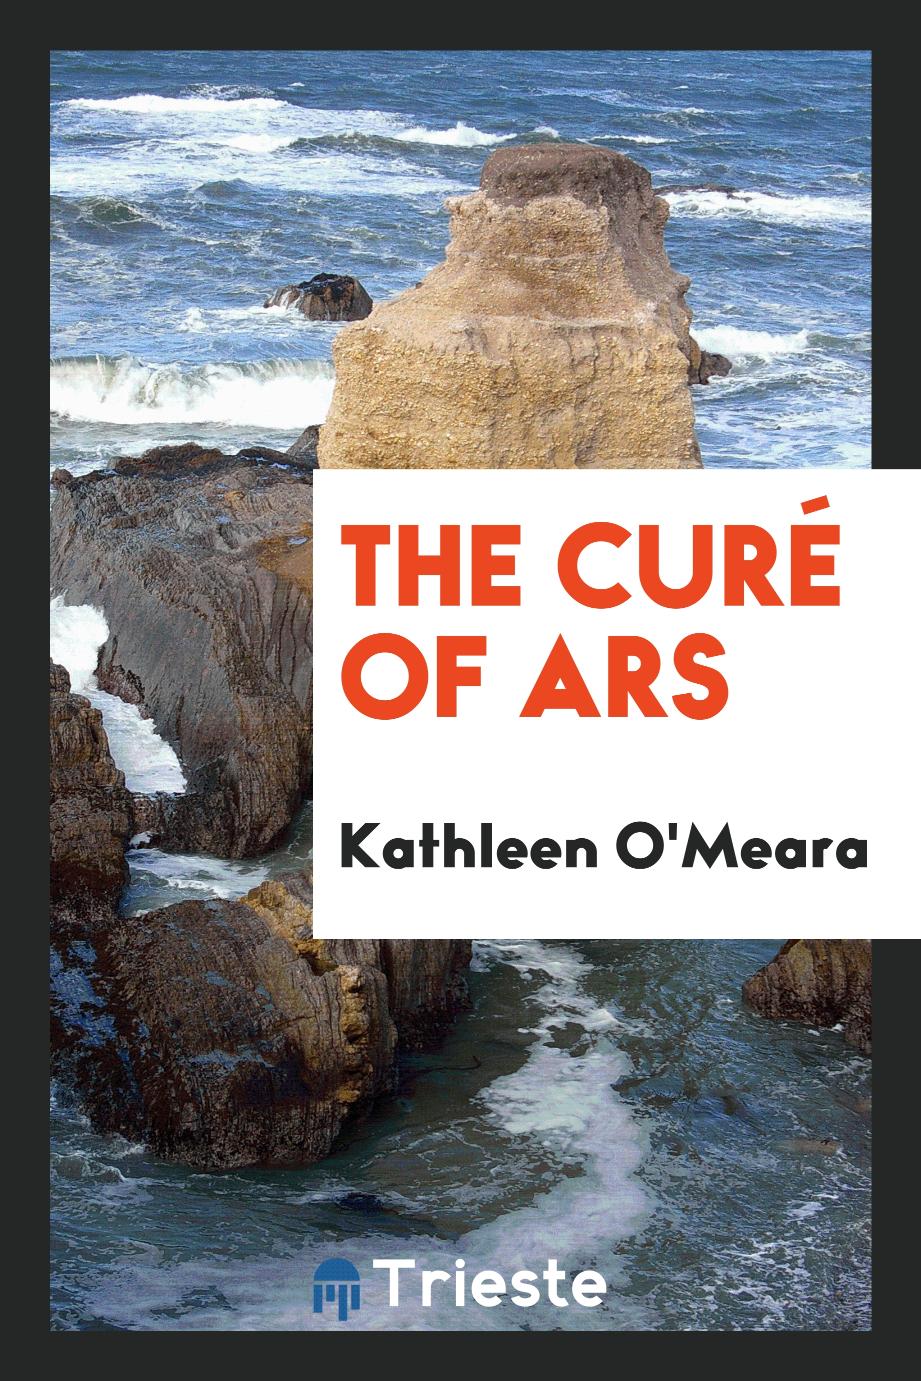 The curé of Ars